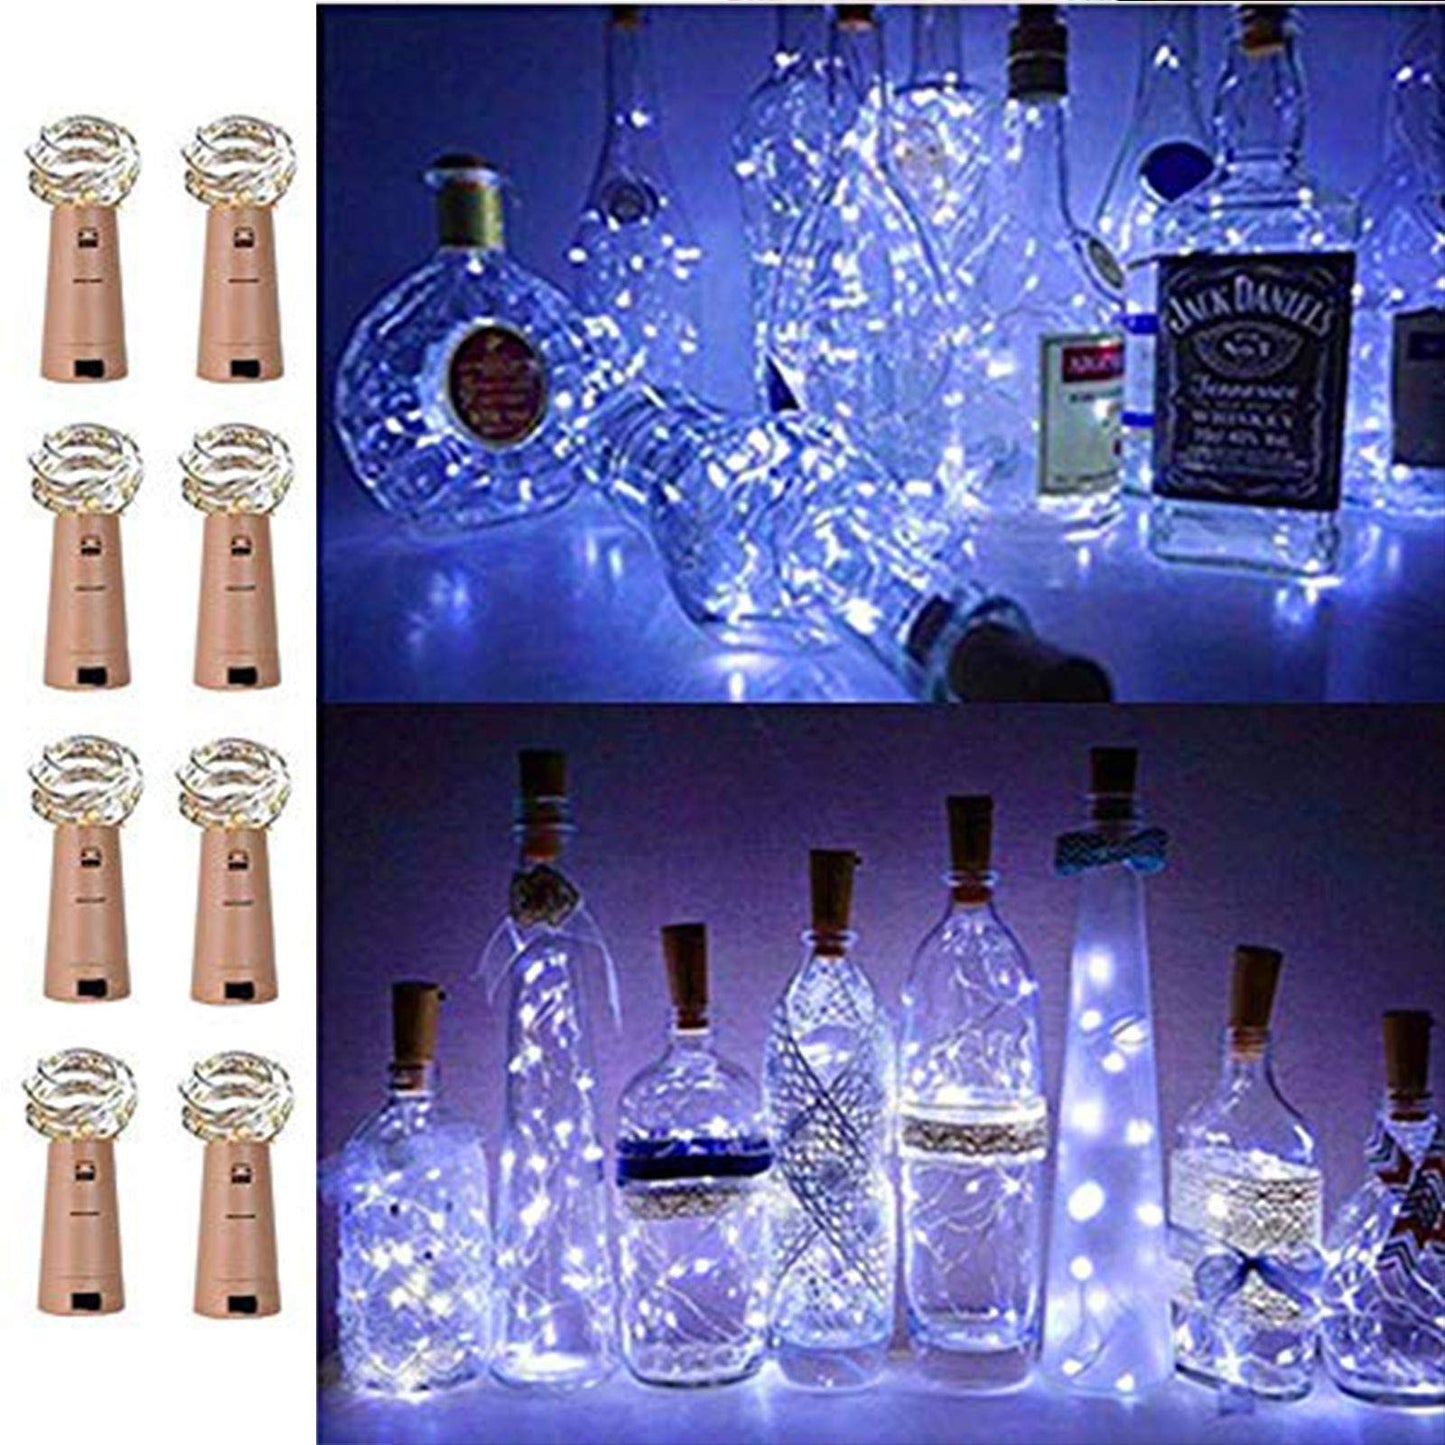 FANSIR Wine Bottle Lights with Cork, 8 Pack Battery Operated LED Cork Shape Silver Wire Fairy Mini String Lights for DIY, Party, Decor, Wedding Indoor Outdoor (Cool White)